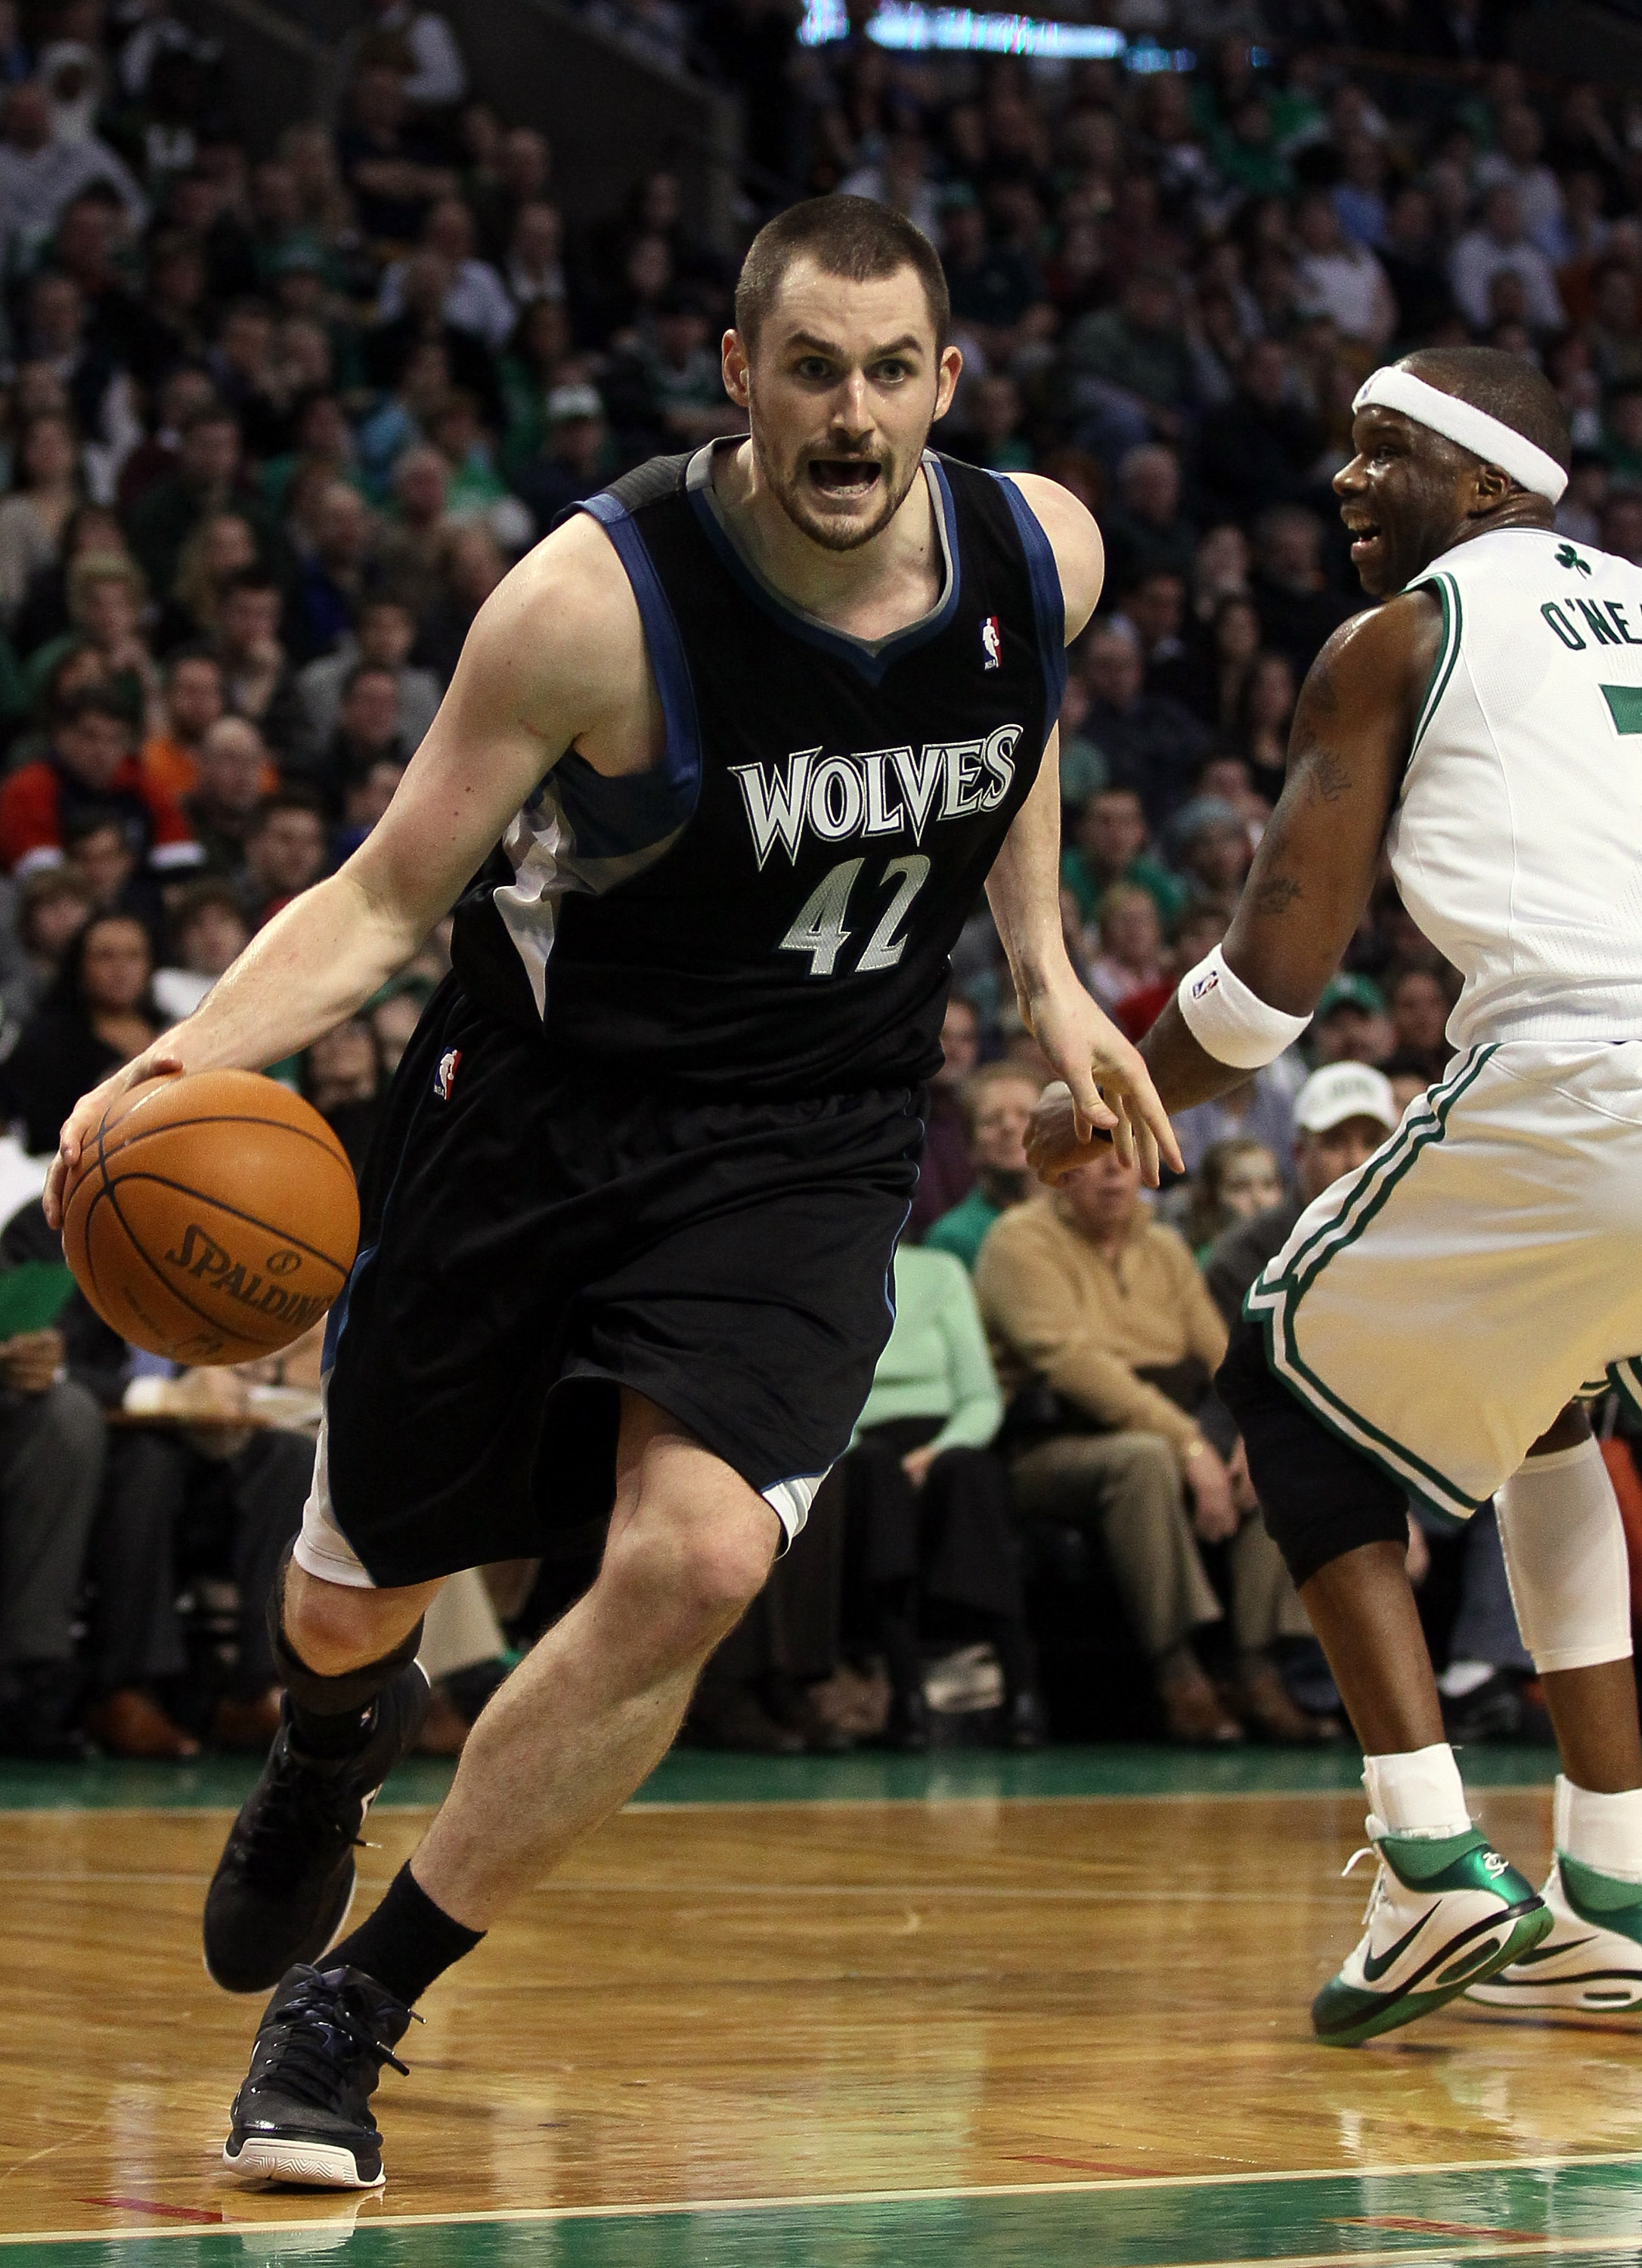 BOSTON, MA - JANUARY 03:  Kevin Love #42 of the Minnesota Timberwolves drives around Jermaine O'Neal #7 of the Boston Celtics on January 3, 2011 at the TD Garden in Boston, Massachusetts. The Celtics defeated the Timberwolves 96-93. NOTE TO USER: User exp